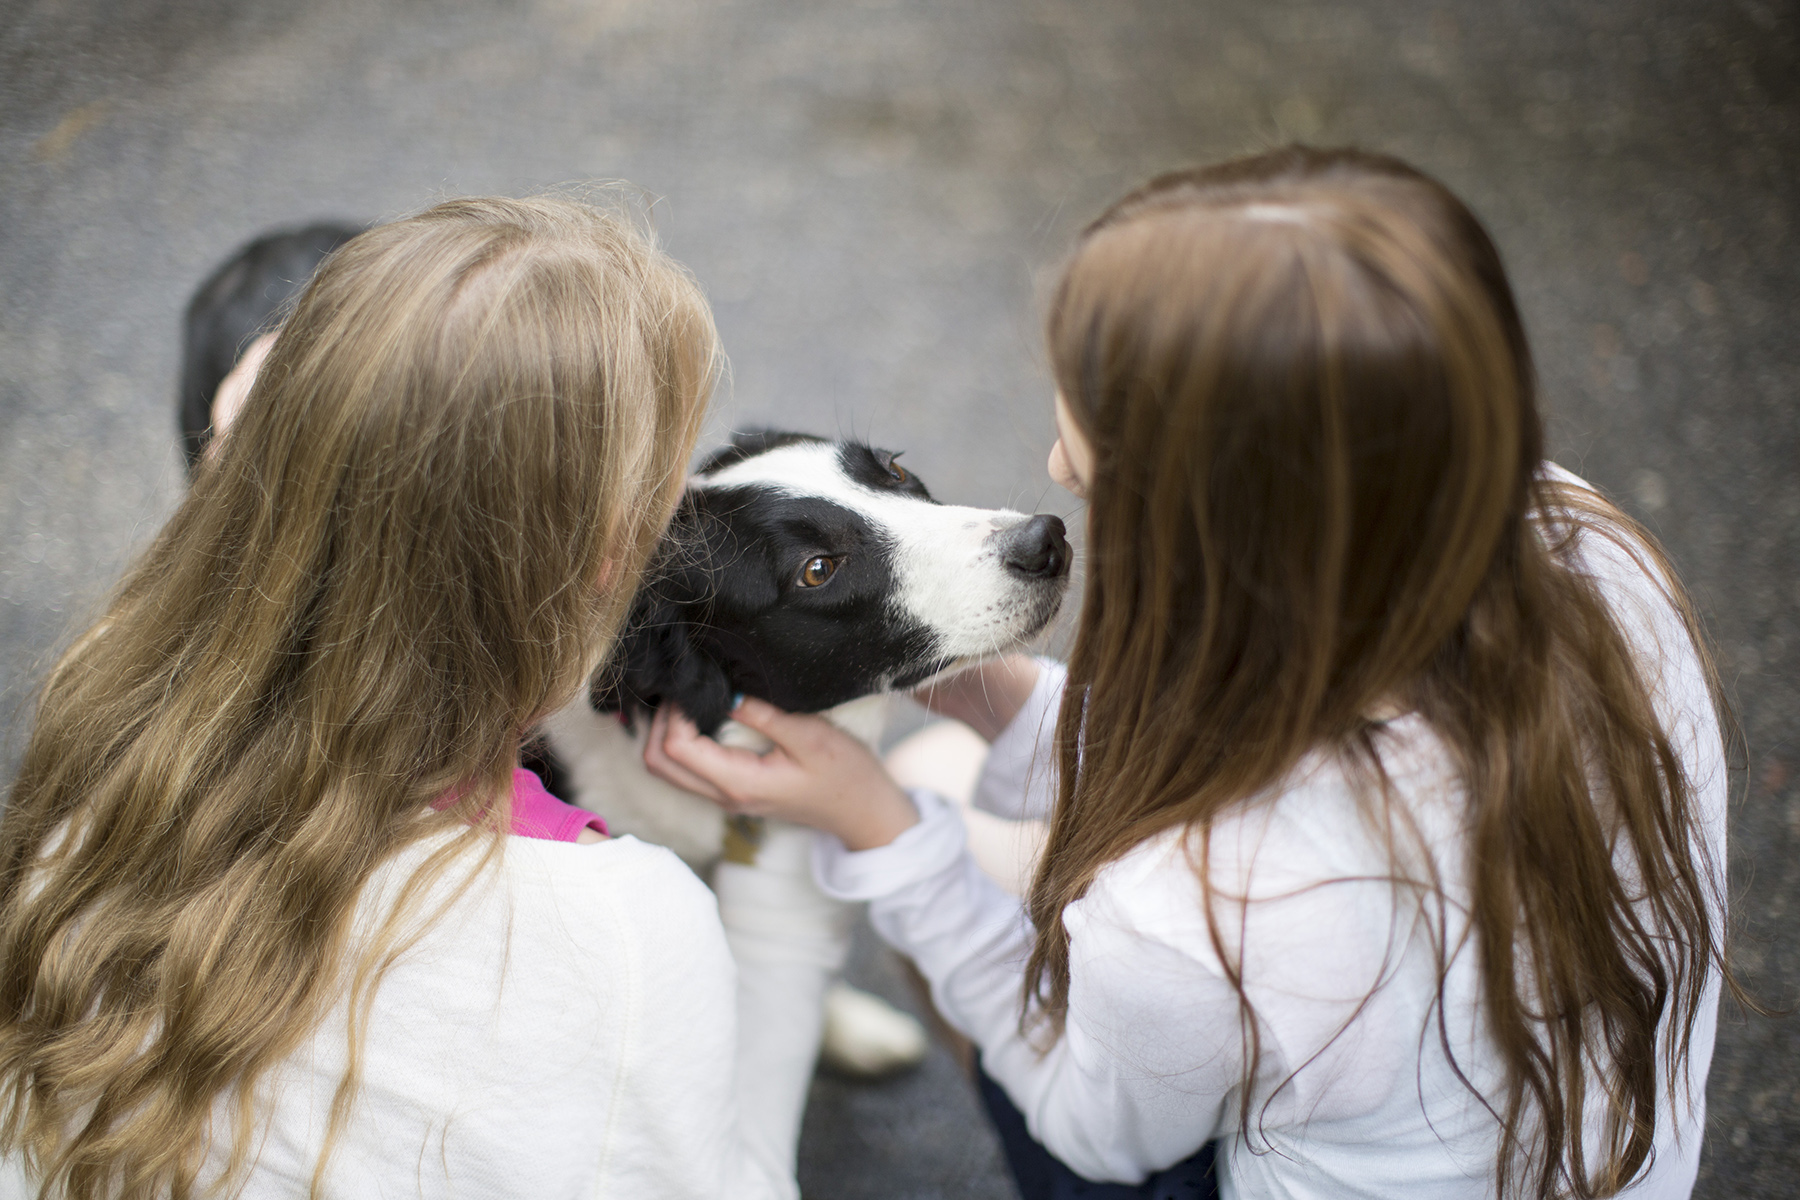 two girls pet black and white dog as the dog sniffs one girls face.